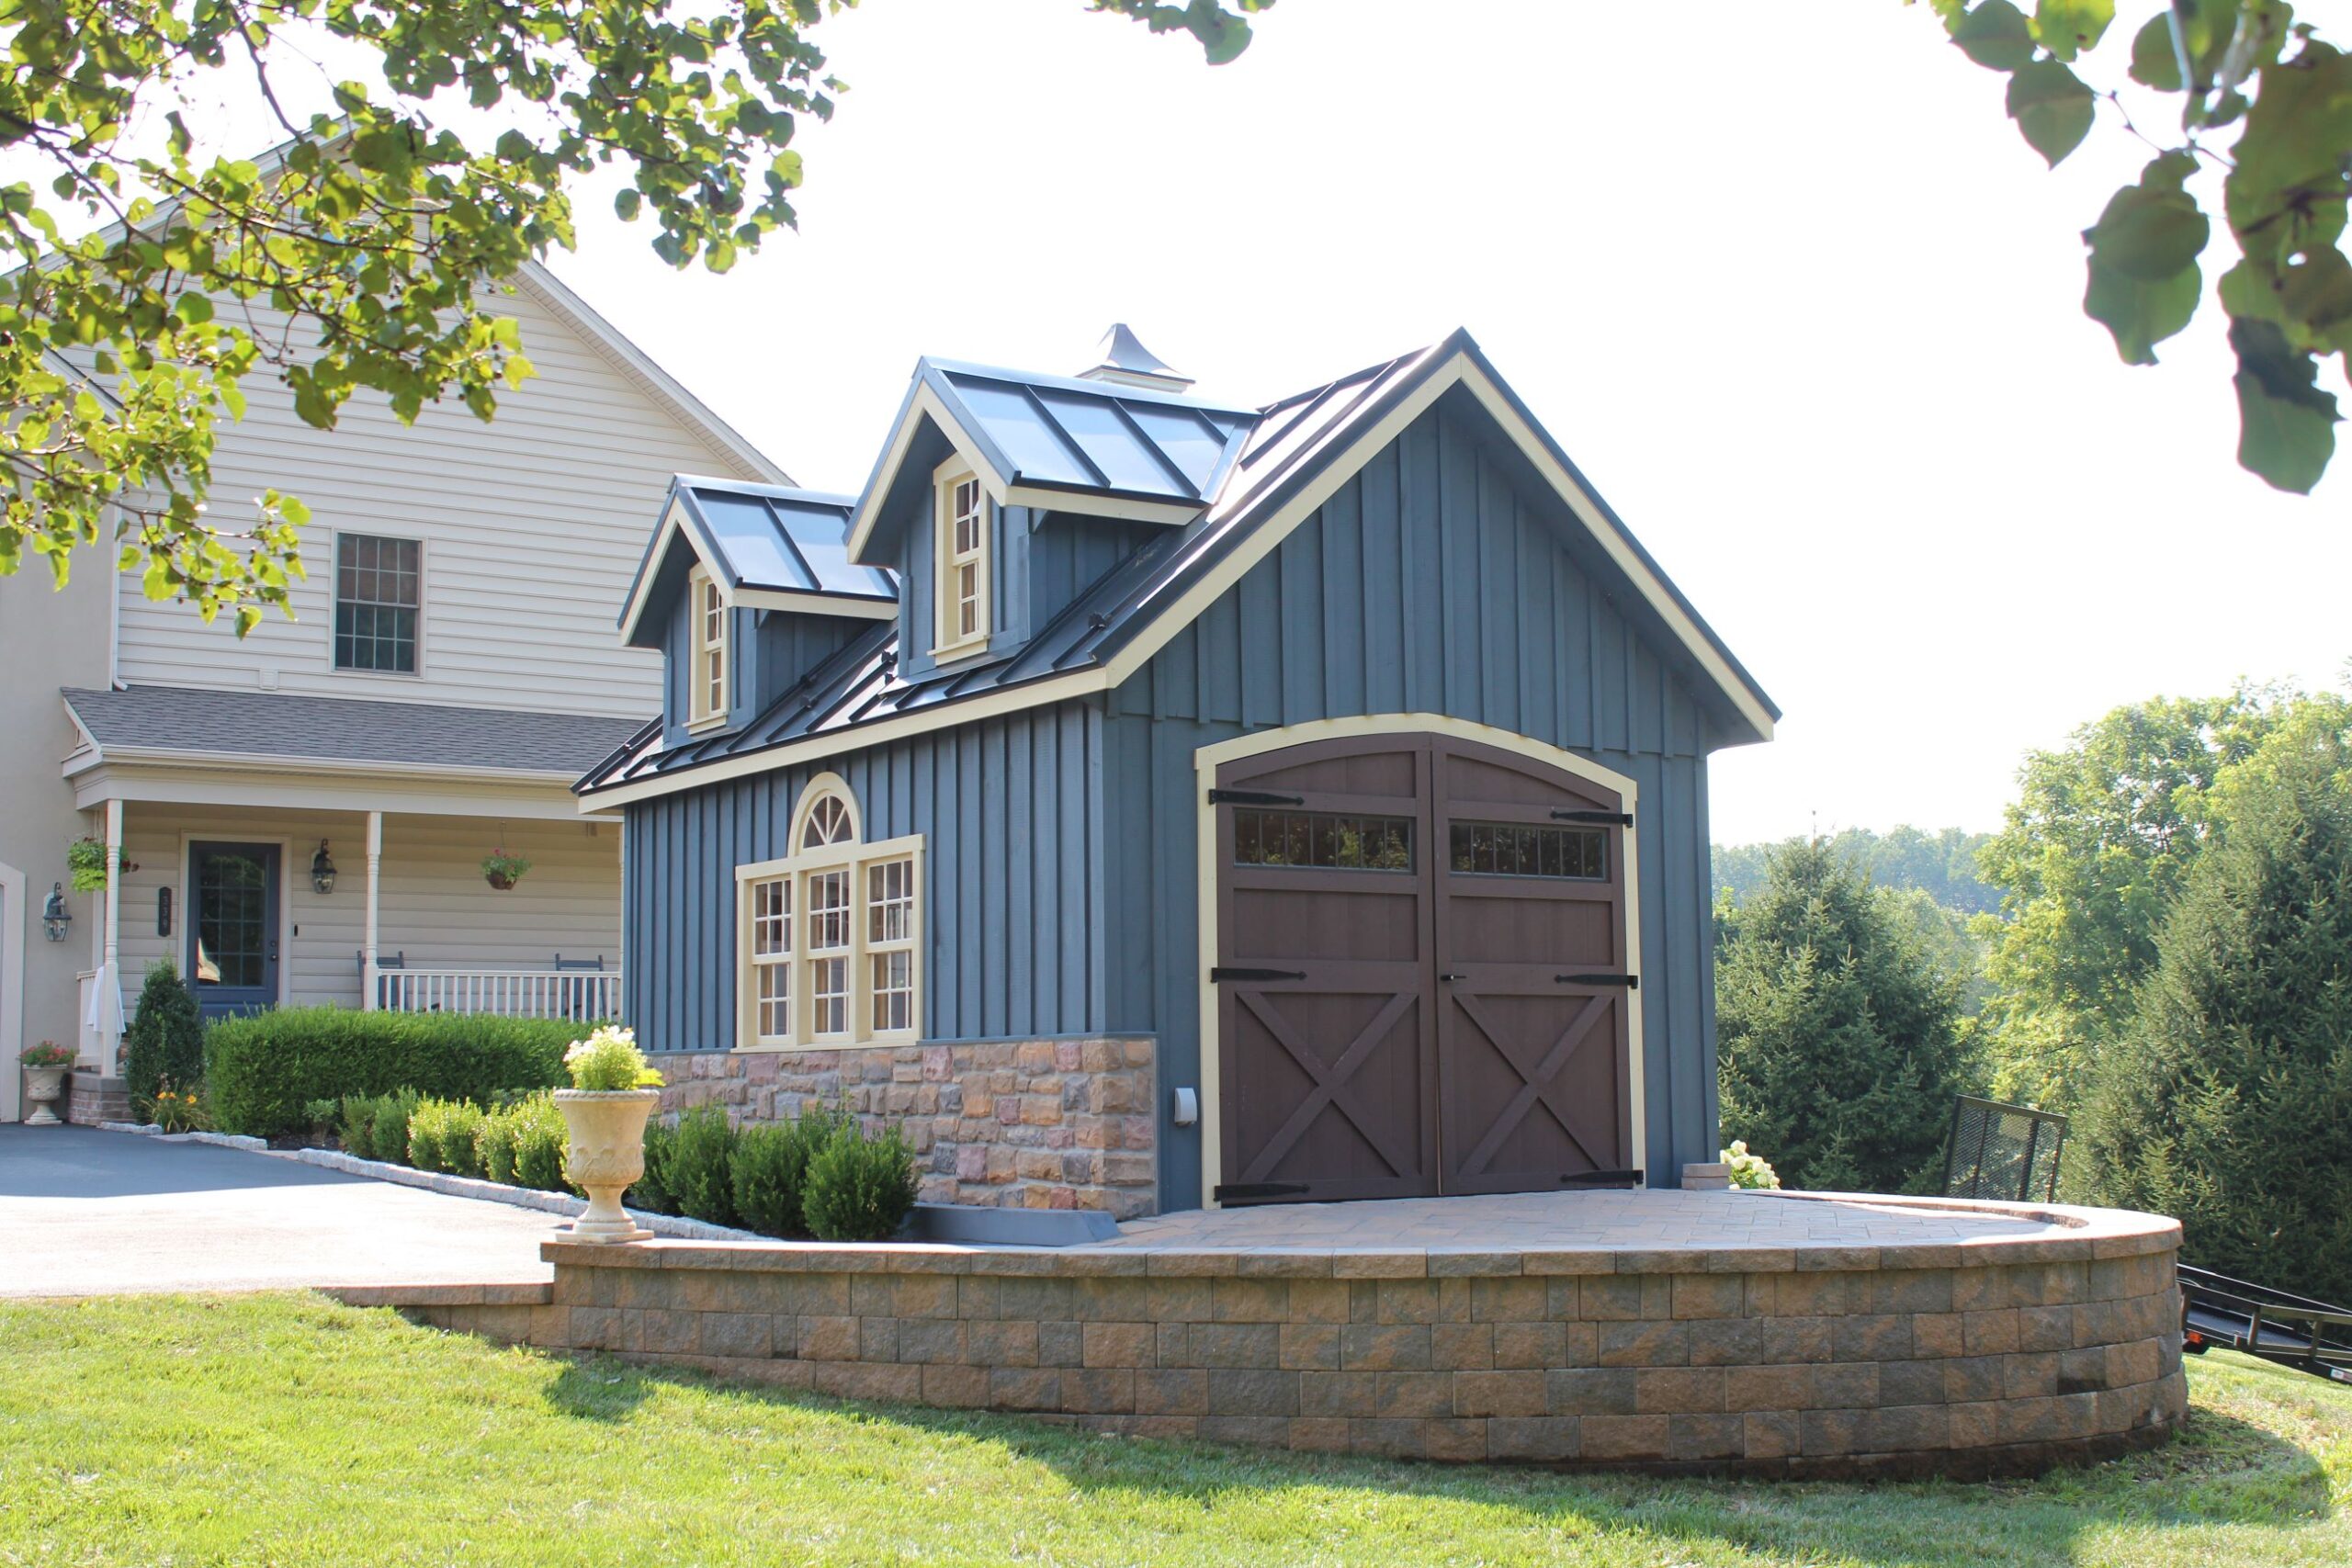 Front and side exterior of a New England Barn Shed with blue siding, stone accents, and white trim.